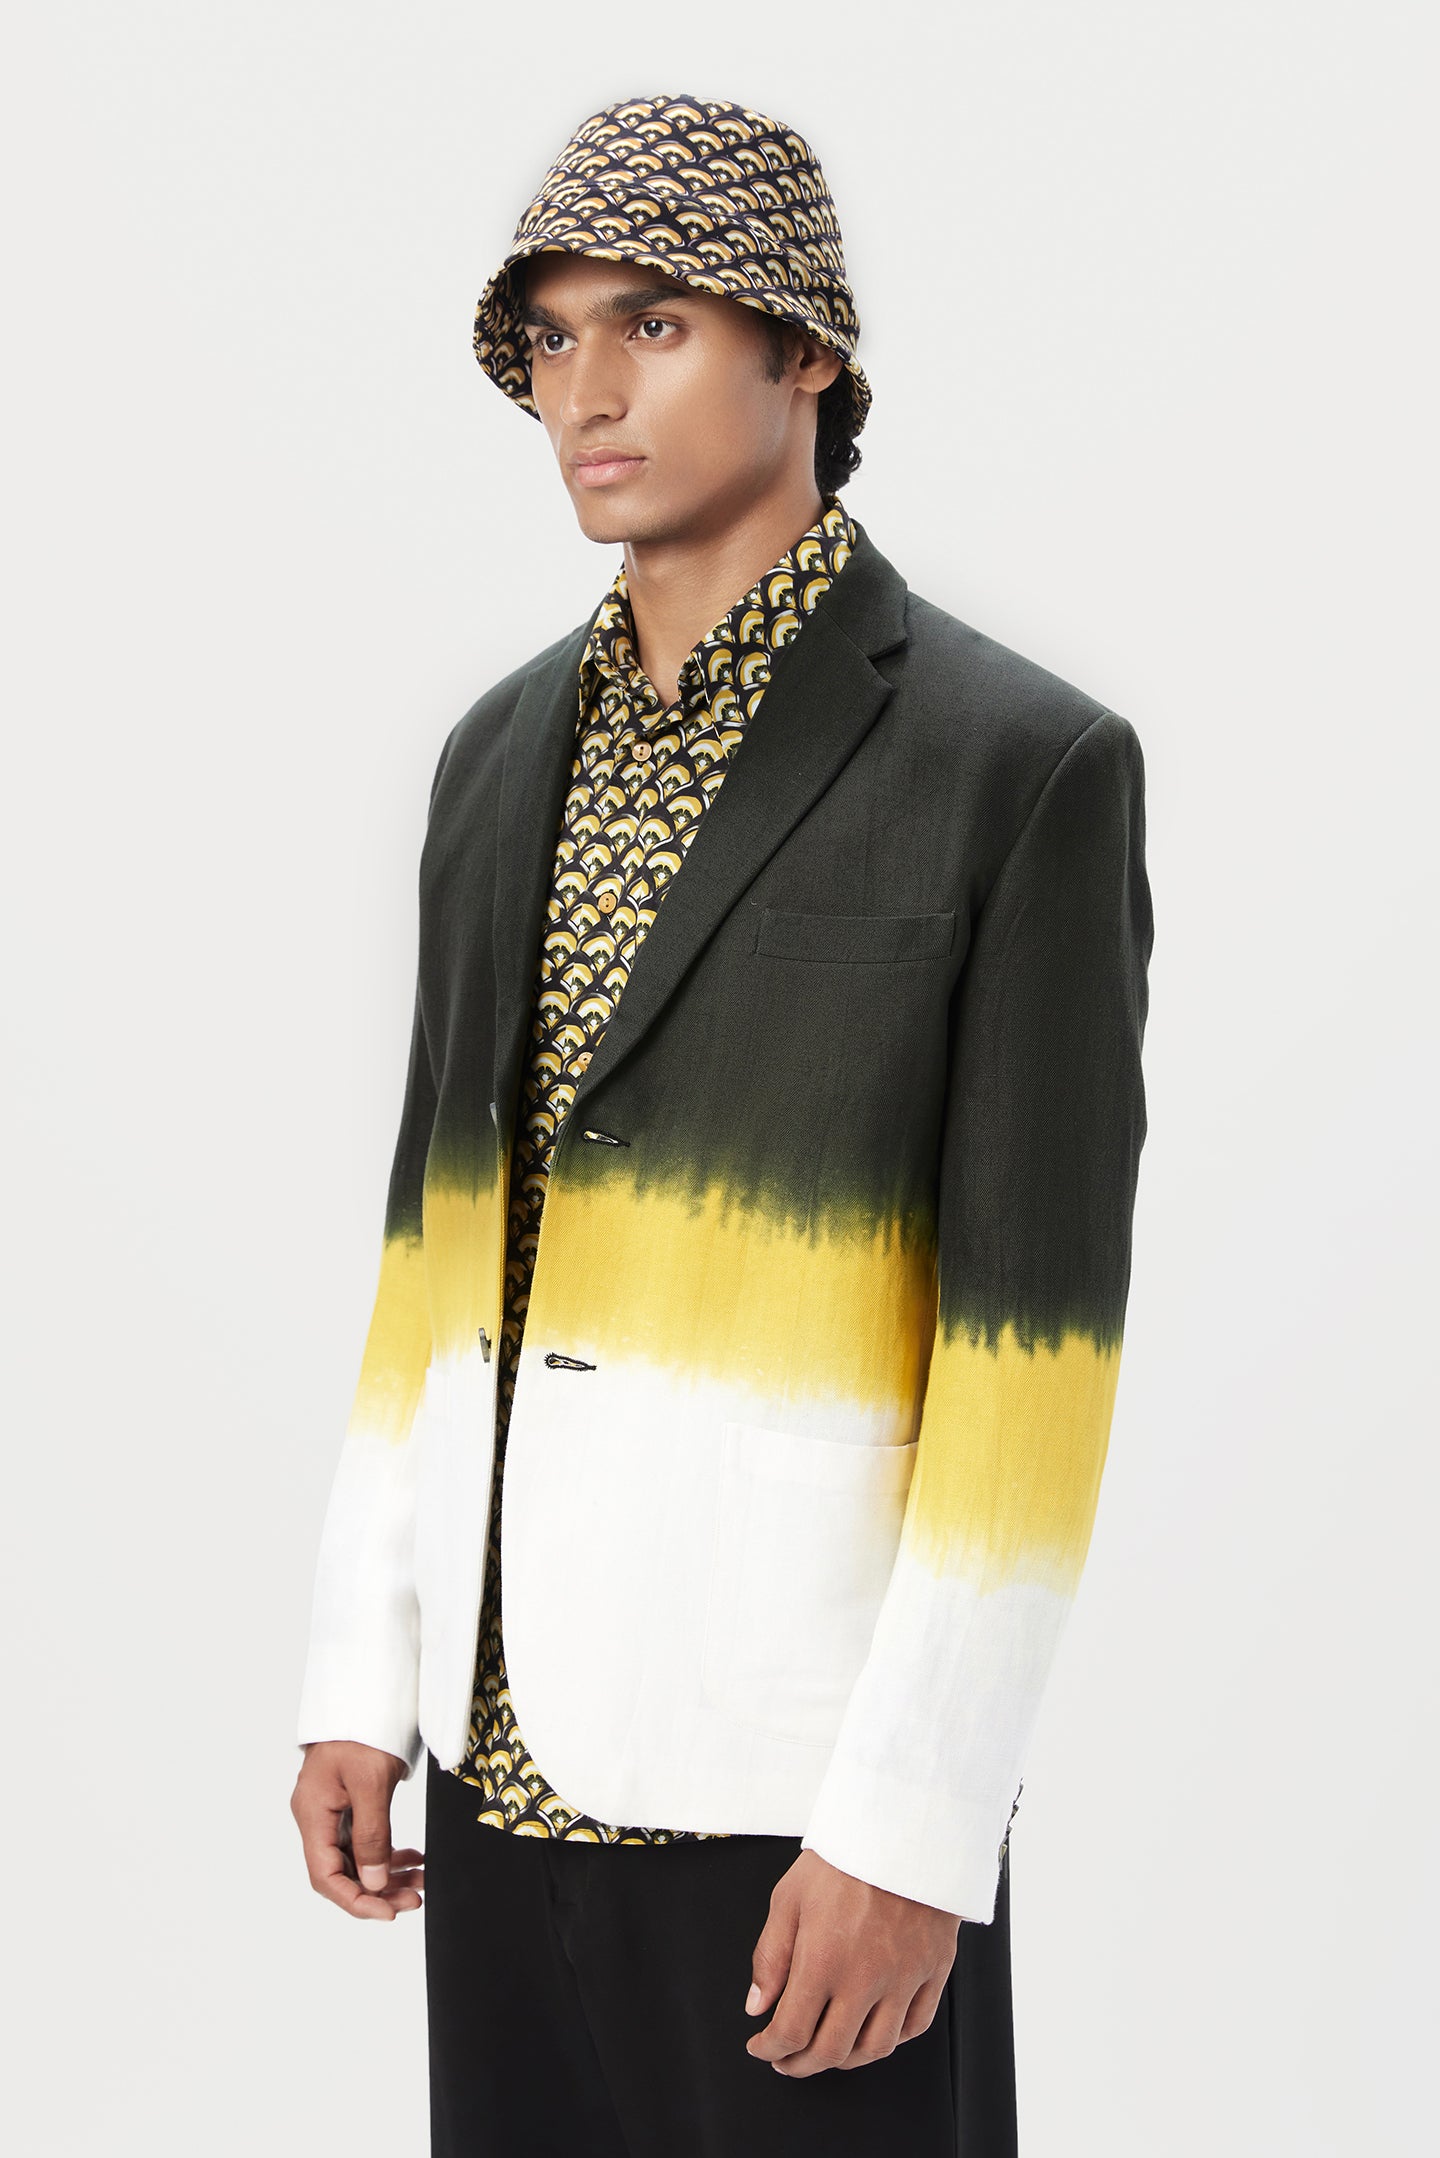 Stylish Two-Button Jacket with Scalloped Printed Lining